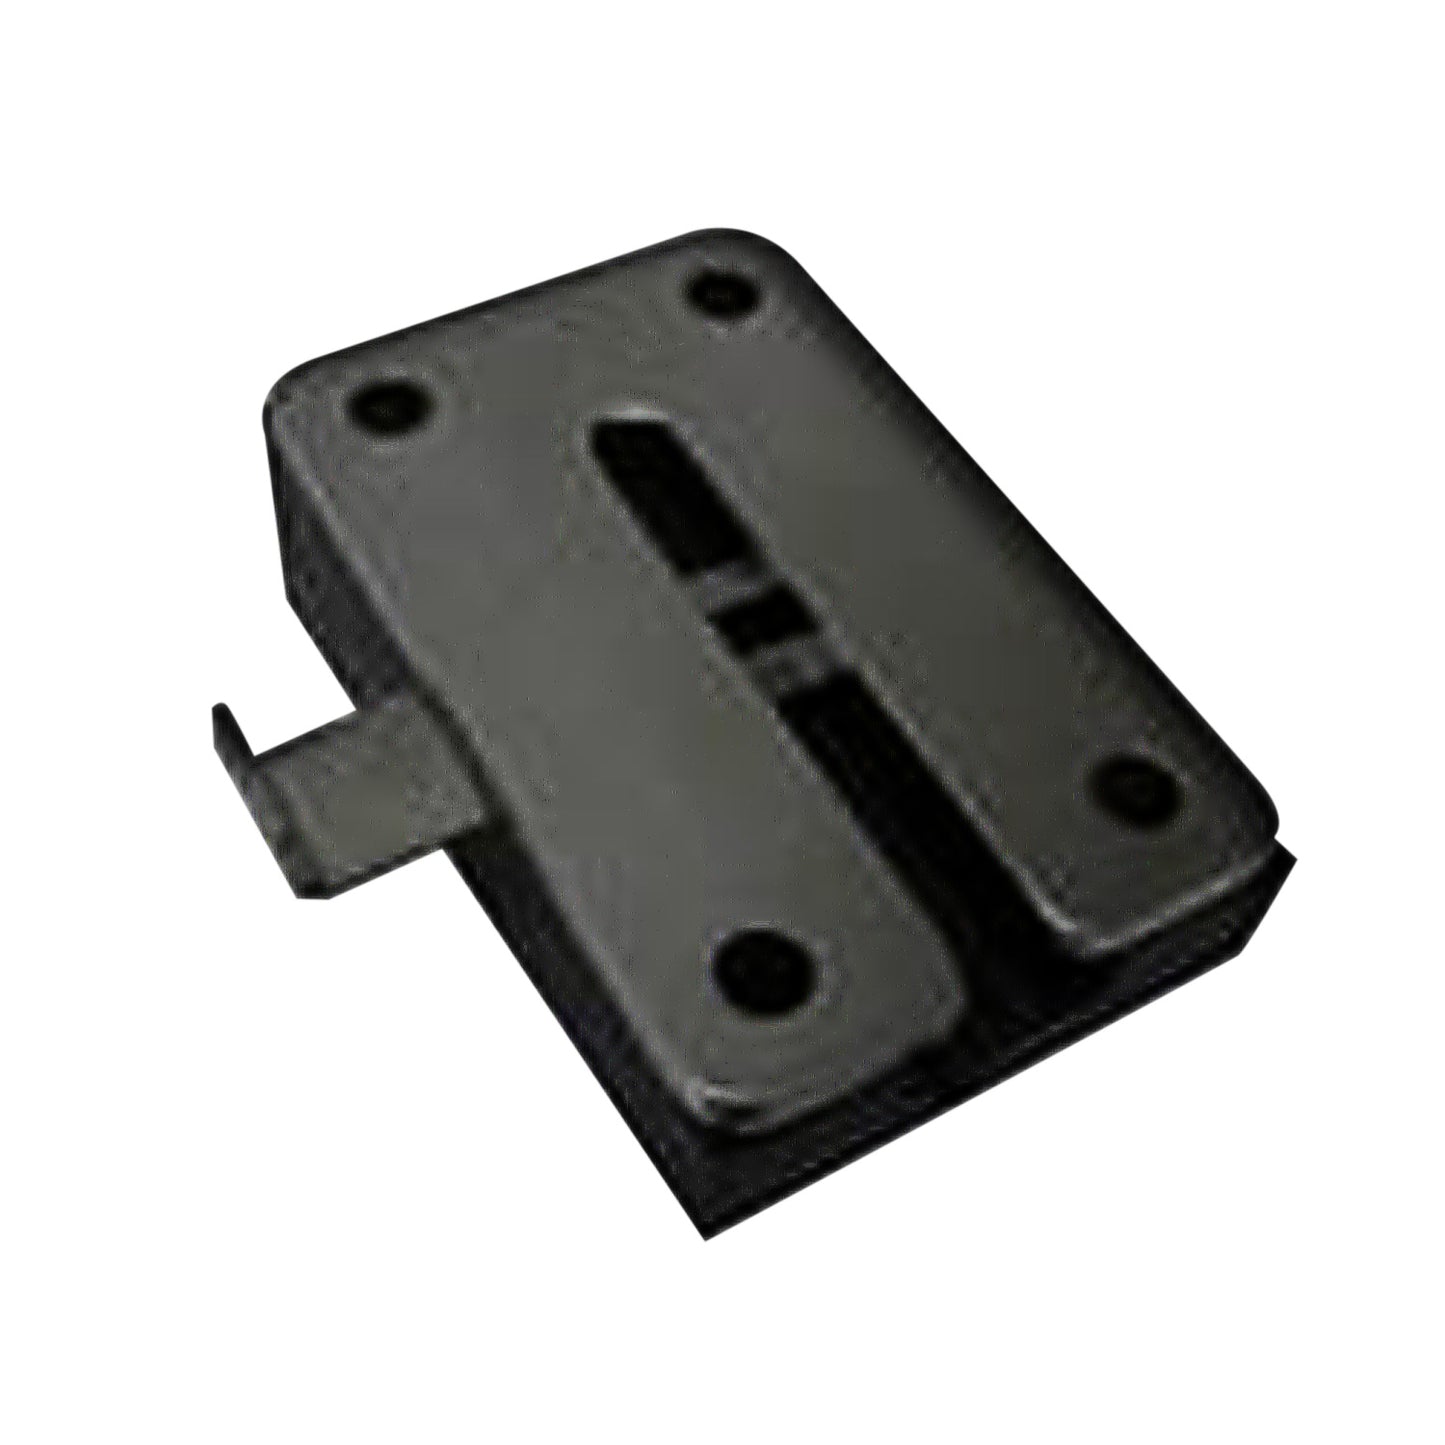 Panther Spare Transom Mount Bracket for Panther Ladders